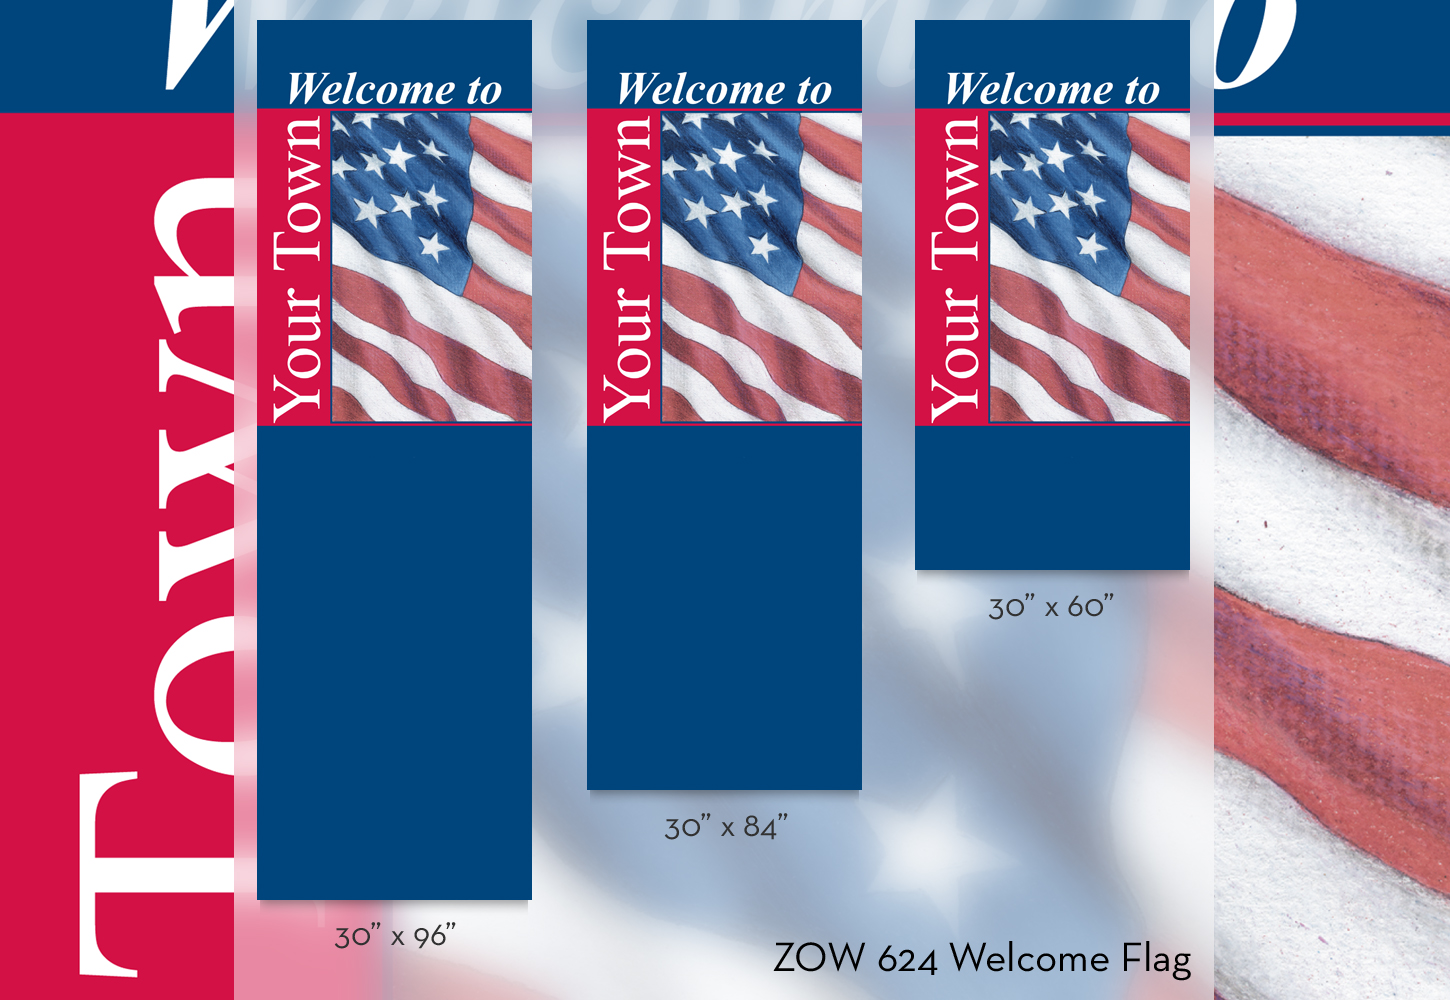 ZOW 624 Welcome Flag